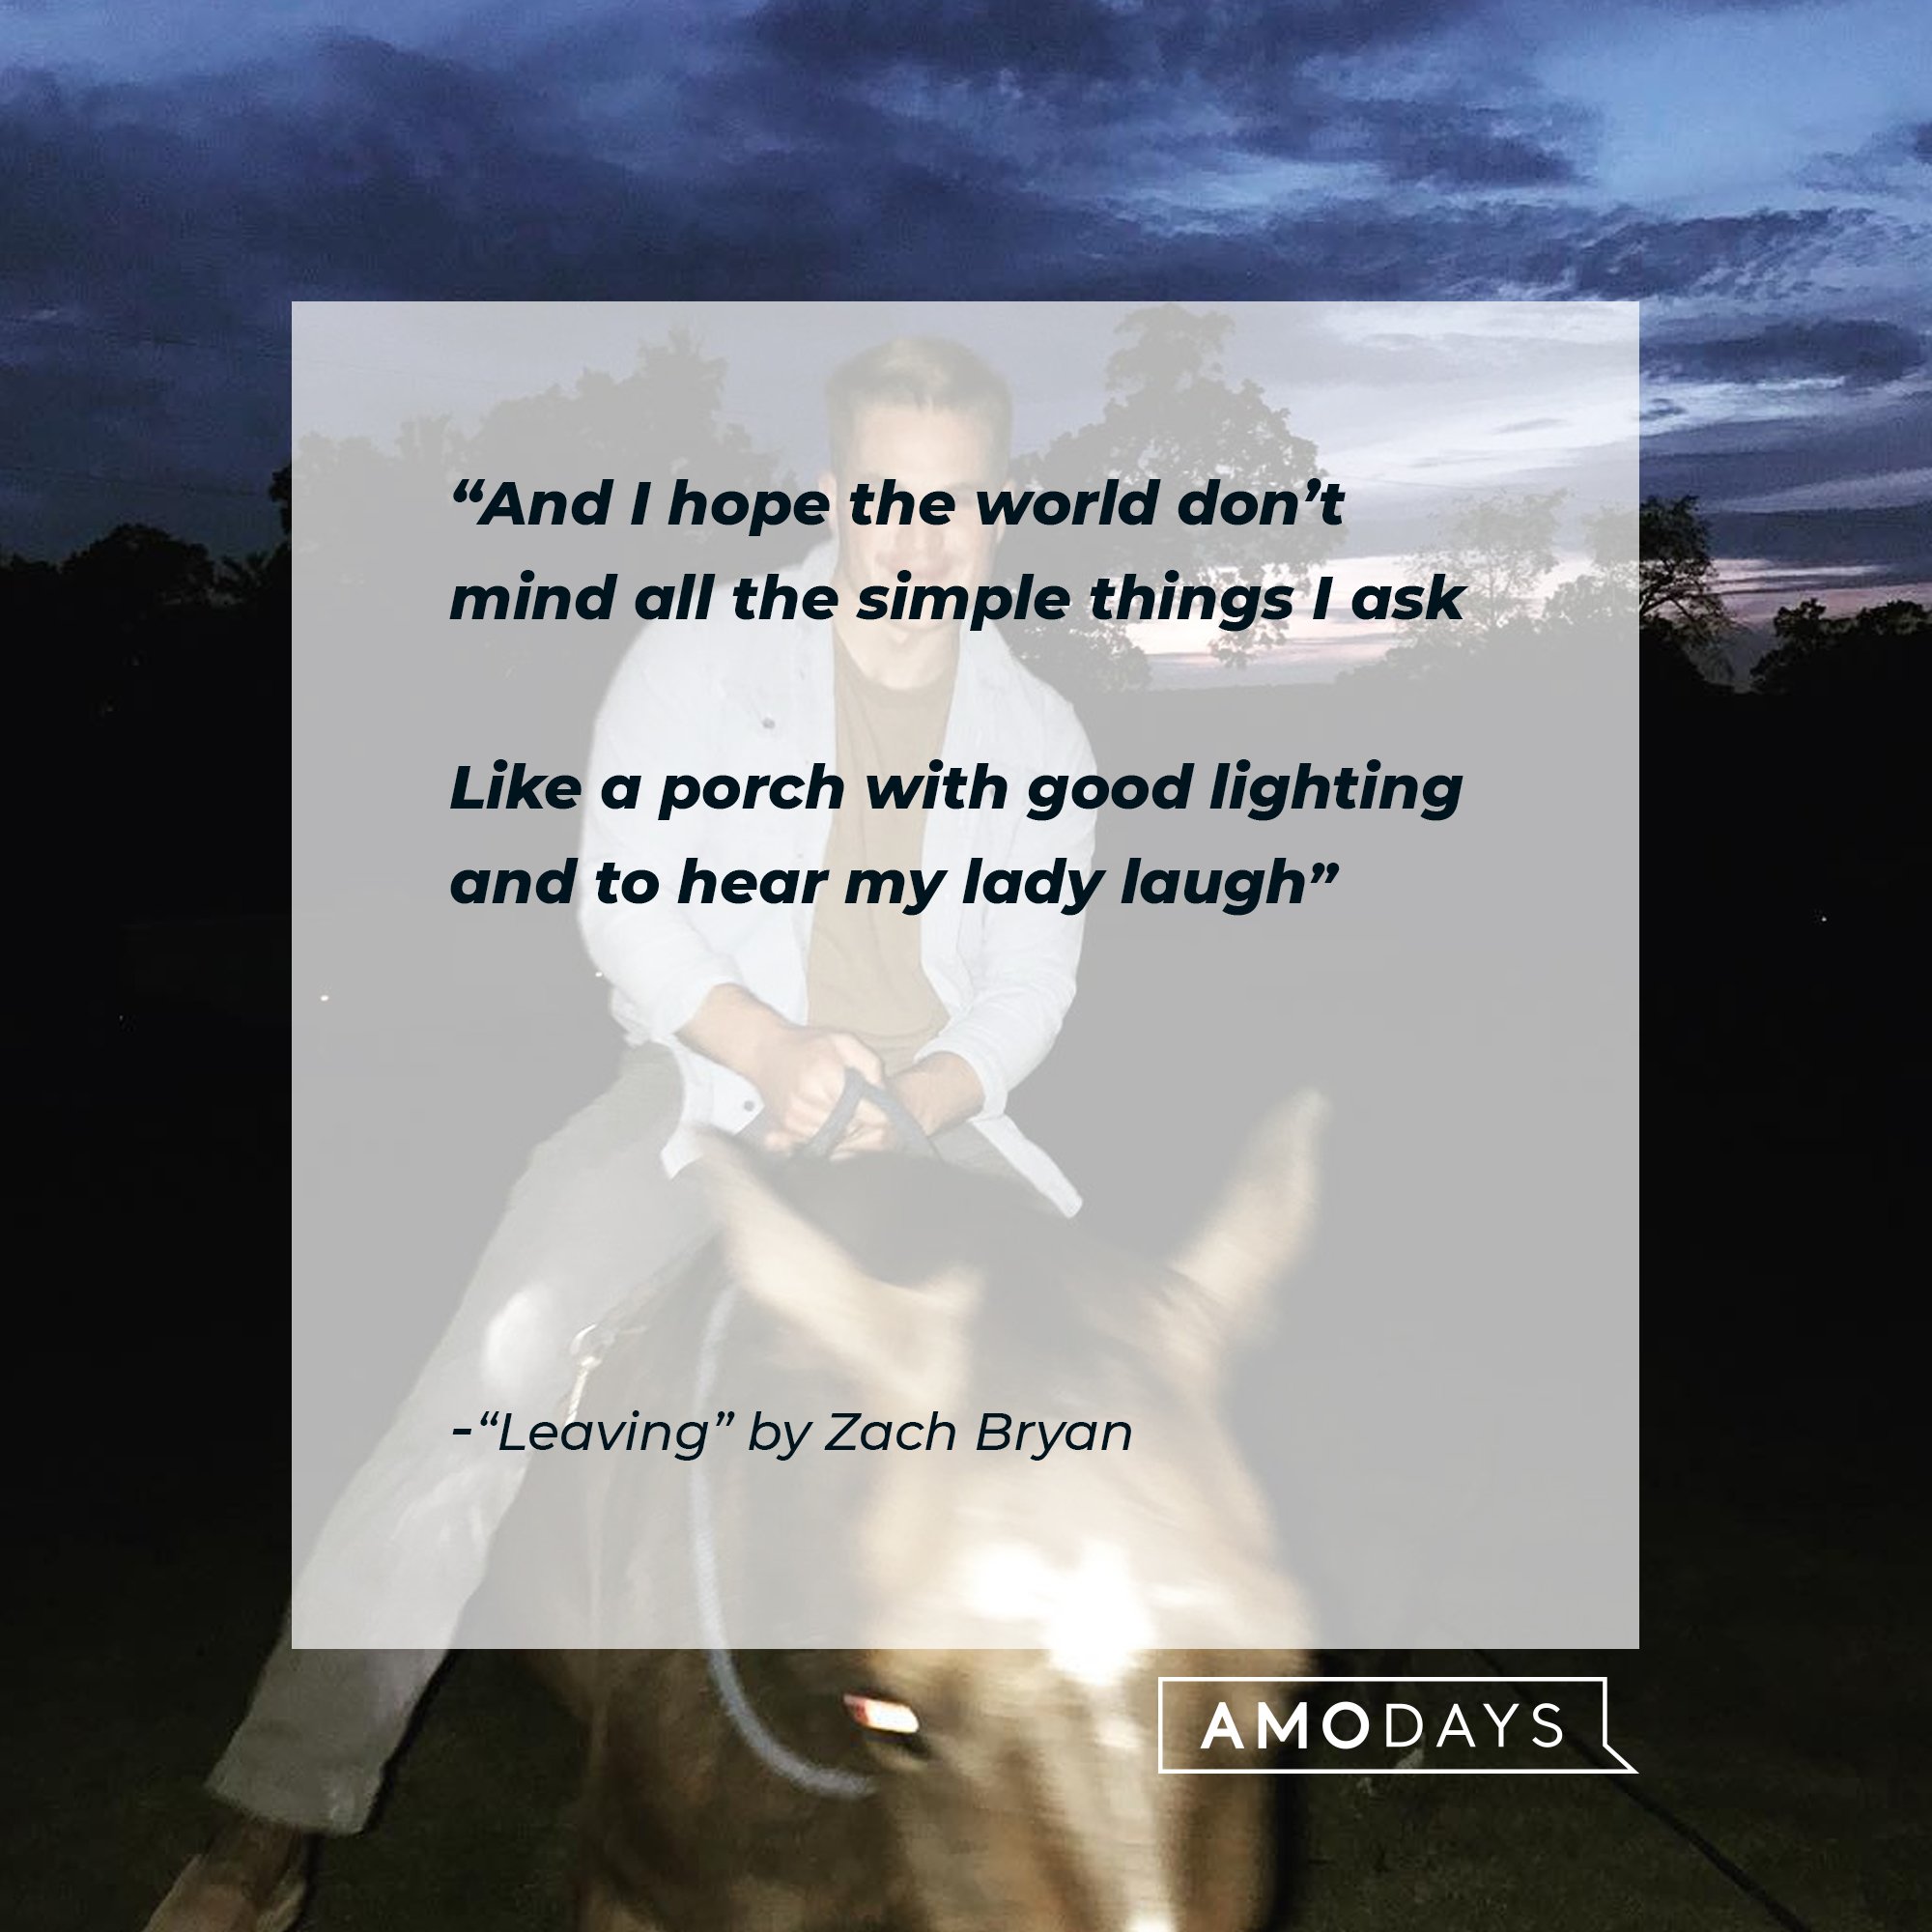 Zach Bryan’s lyrics from ”Leaving”: "And I hope the world don’t mind all the simple things I ask/ Like a porch with good lighting and to hear my lady laugh" | Image: AmoDays